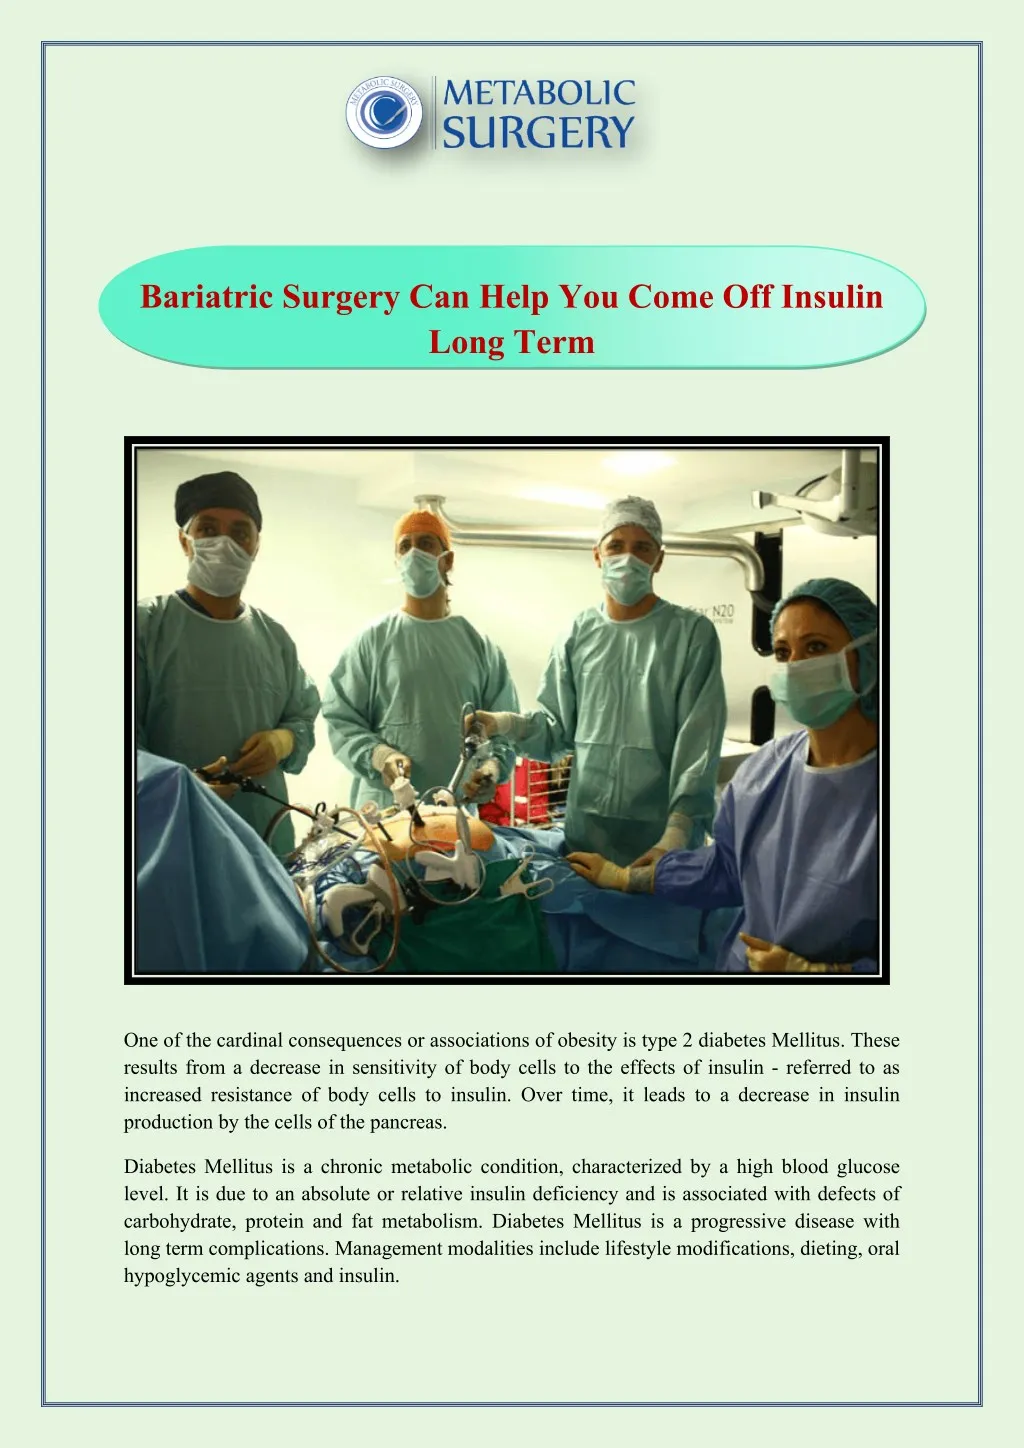 bariatric surgery can help you come off insulin